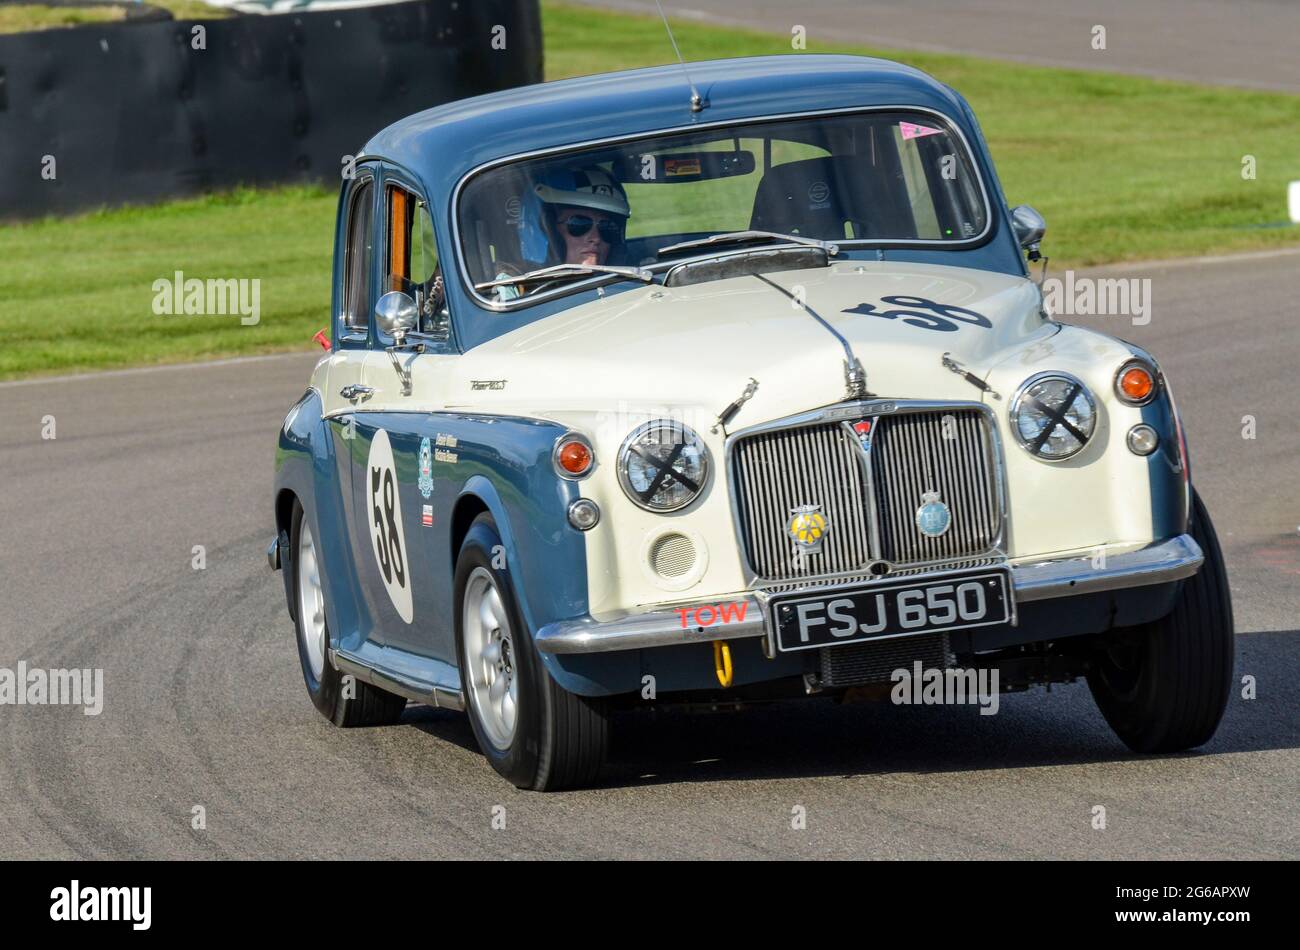 Rover 100 P4 classic saloon, vintage racing car competing in the St Marys Trophy at the Goodwood Revival historic event, UK. Cornering. Female driver Stock Photo